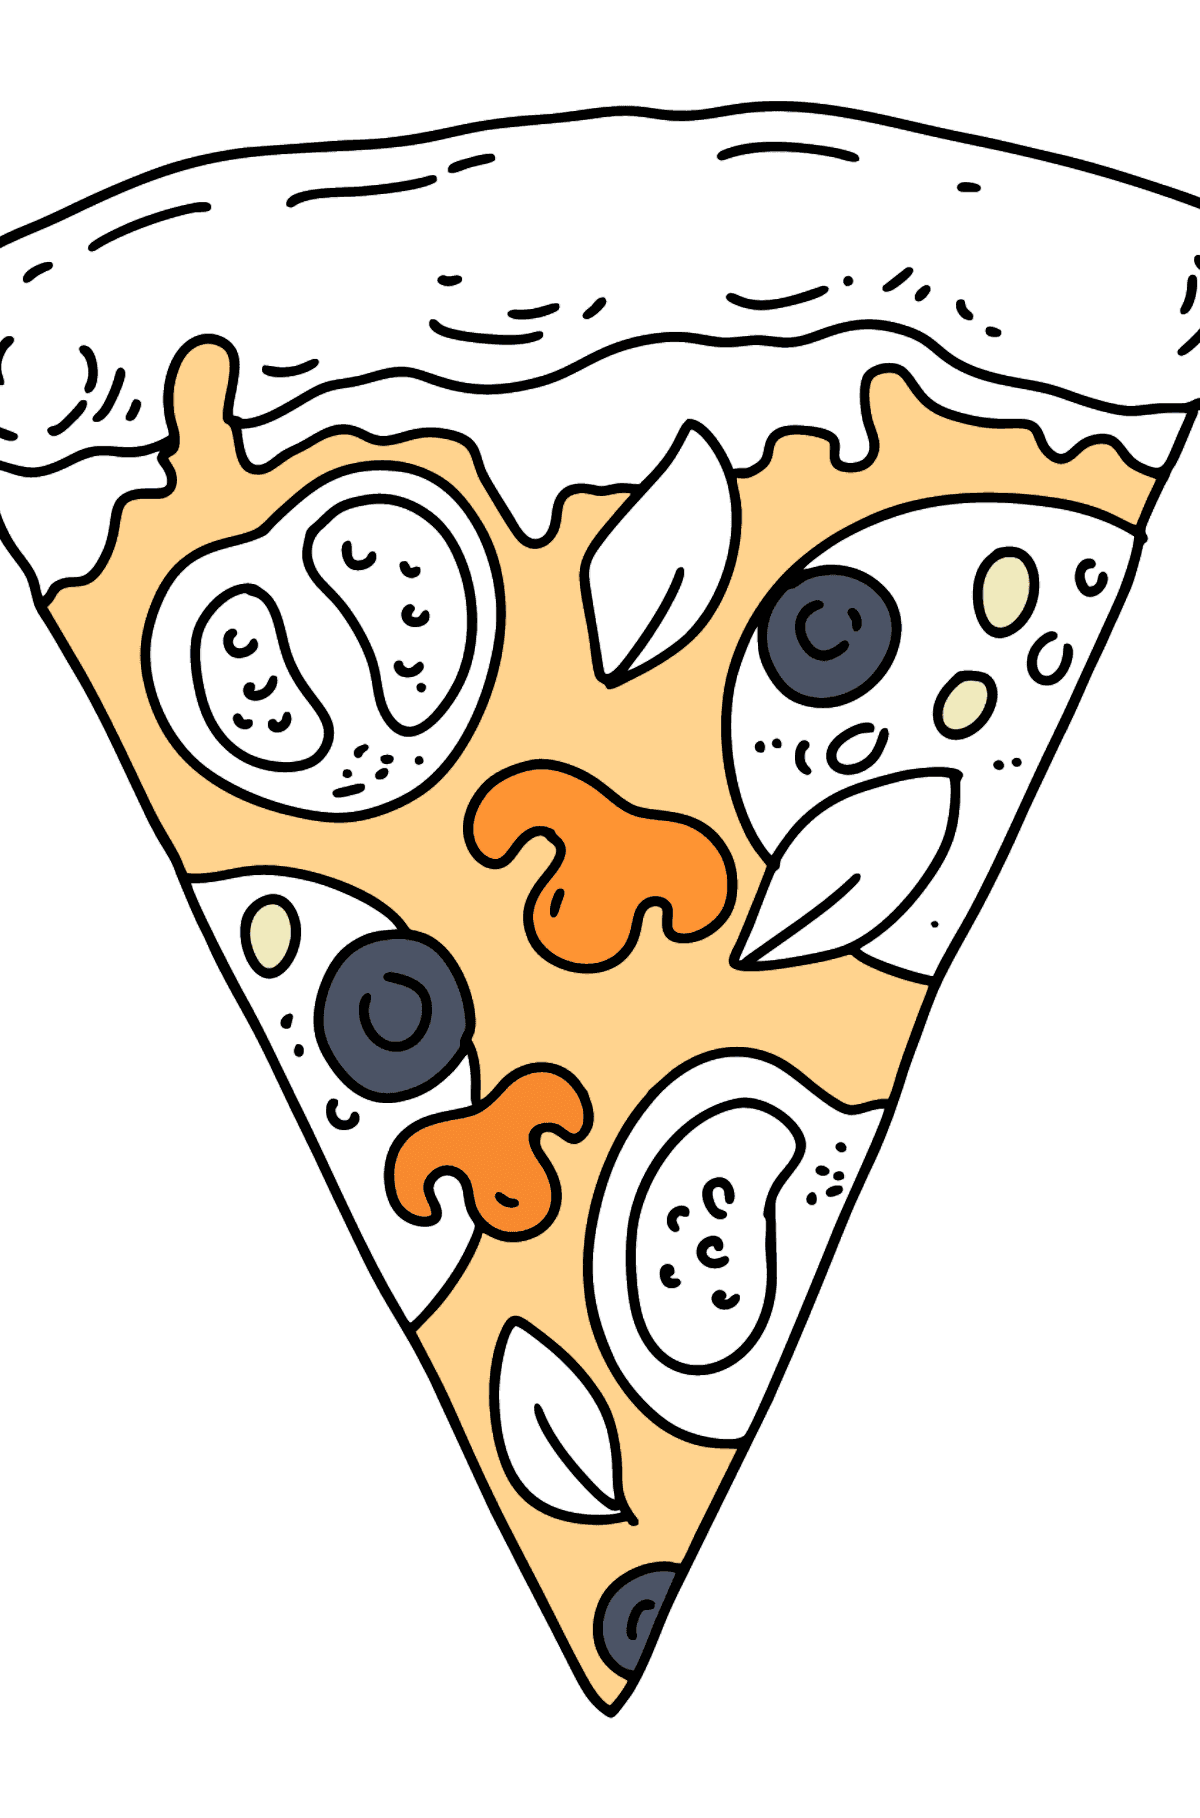 Pizza with Tomatoes and Mushrooms coloring page - Coloring Pages for Kids